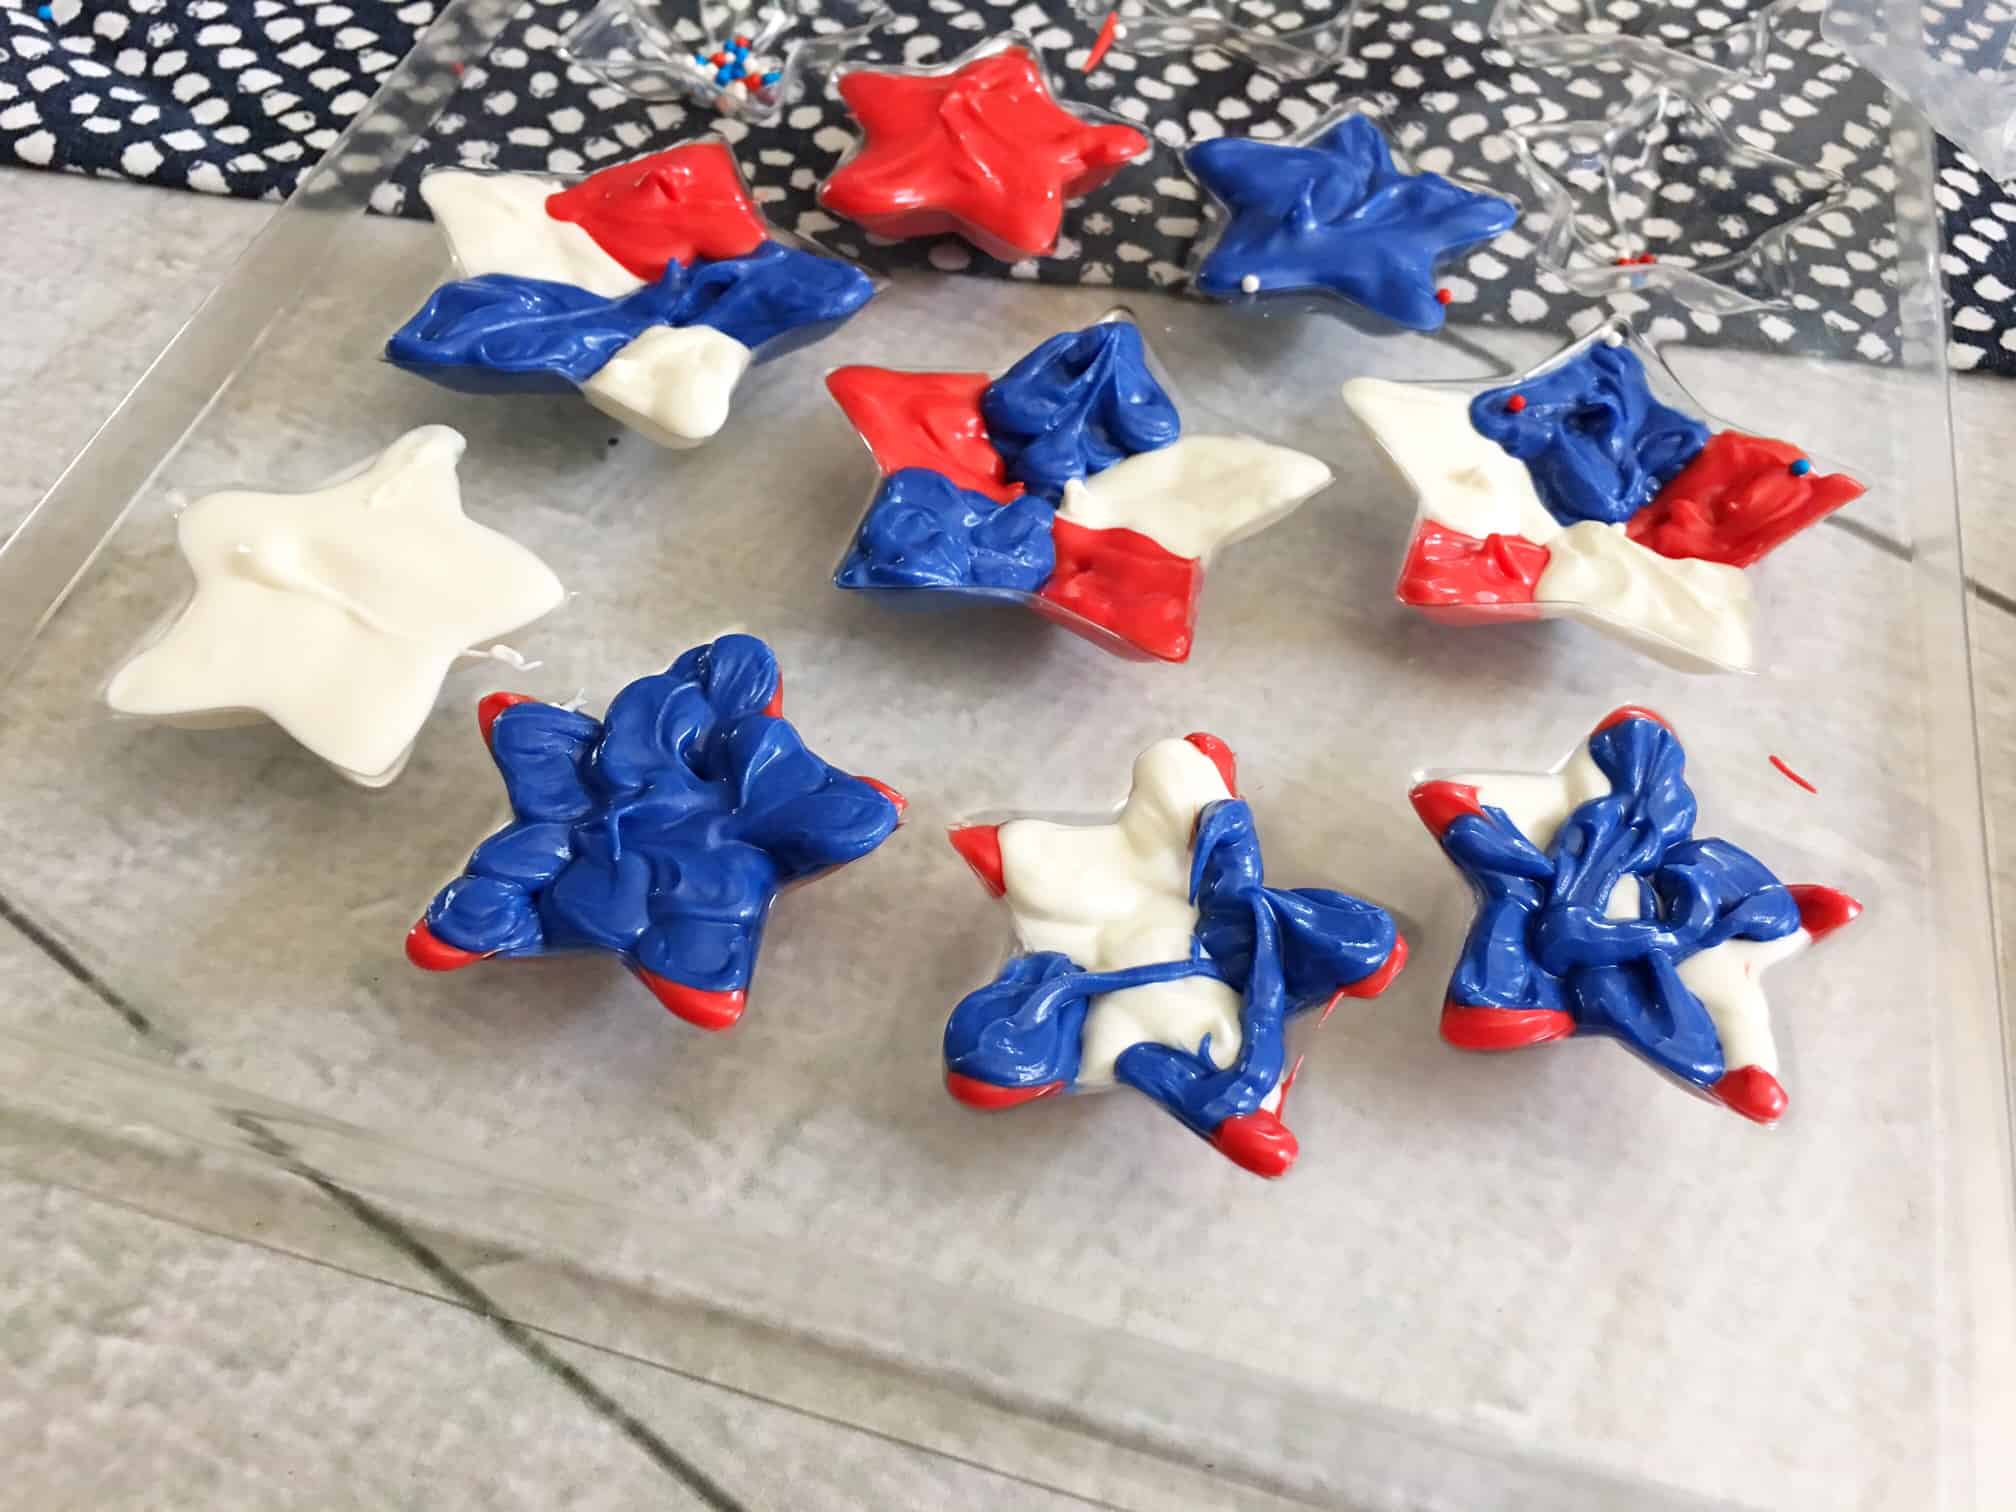 Red, White, and Blue Desserts